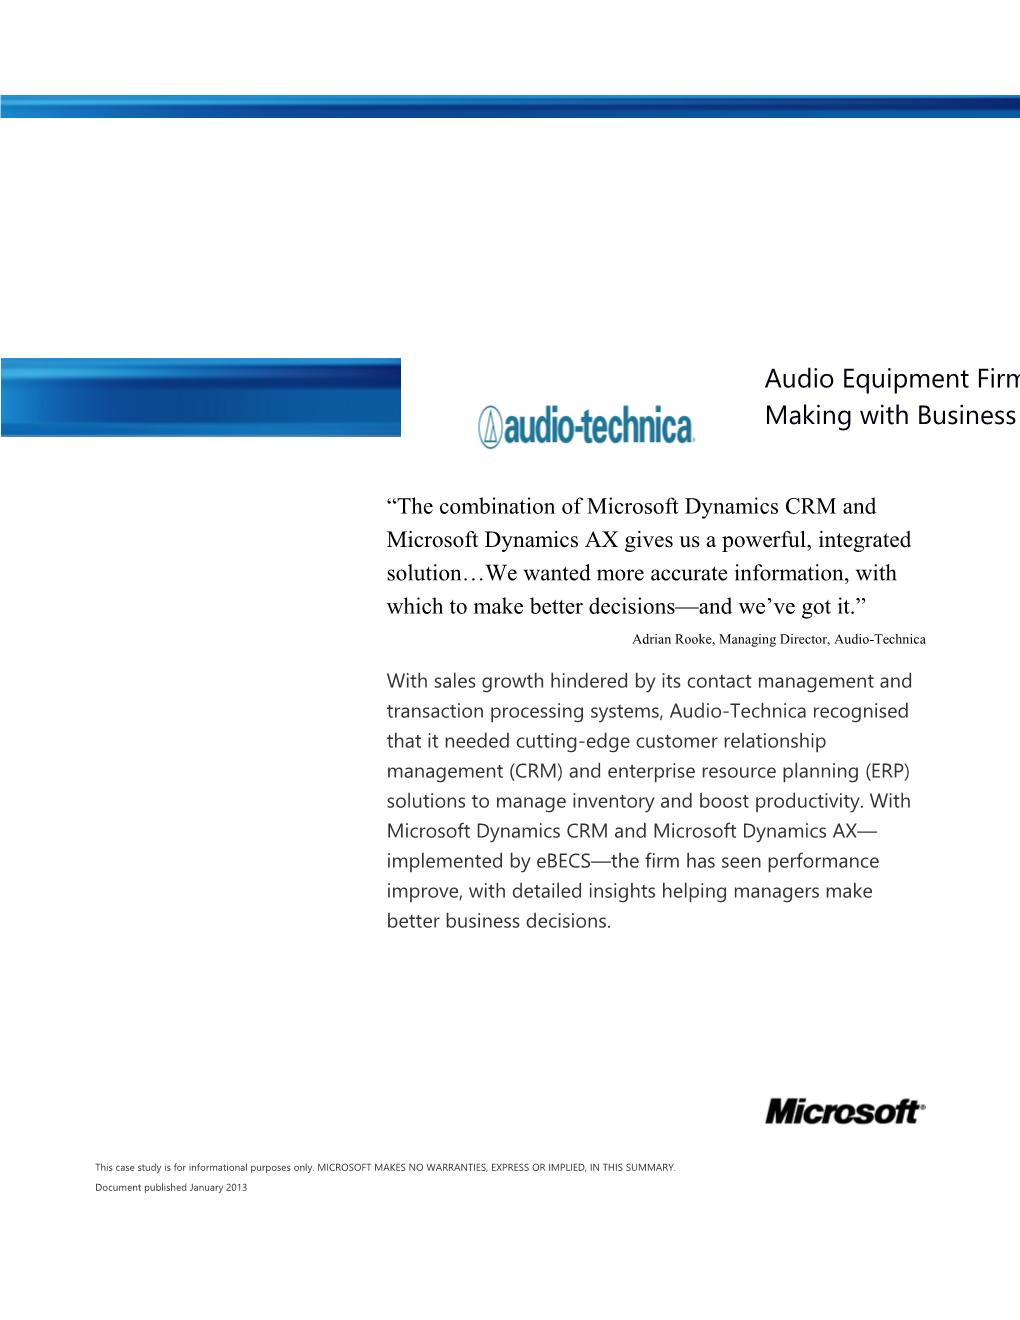 Writeimage CSB Total Clarity with Ebecs, Microsoft Dynamics AX and CRM: Audio Equipment